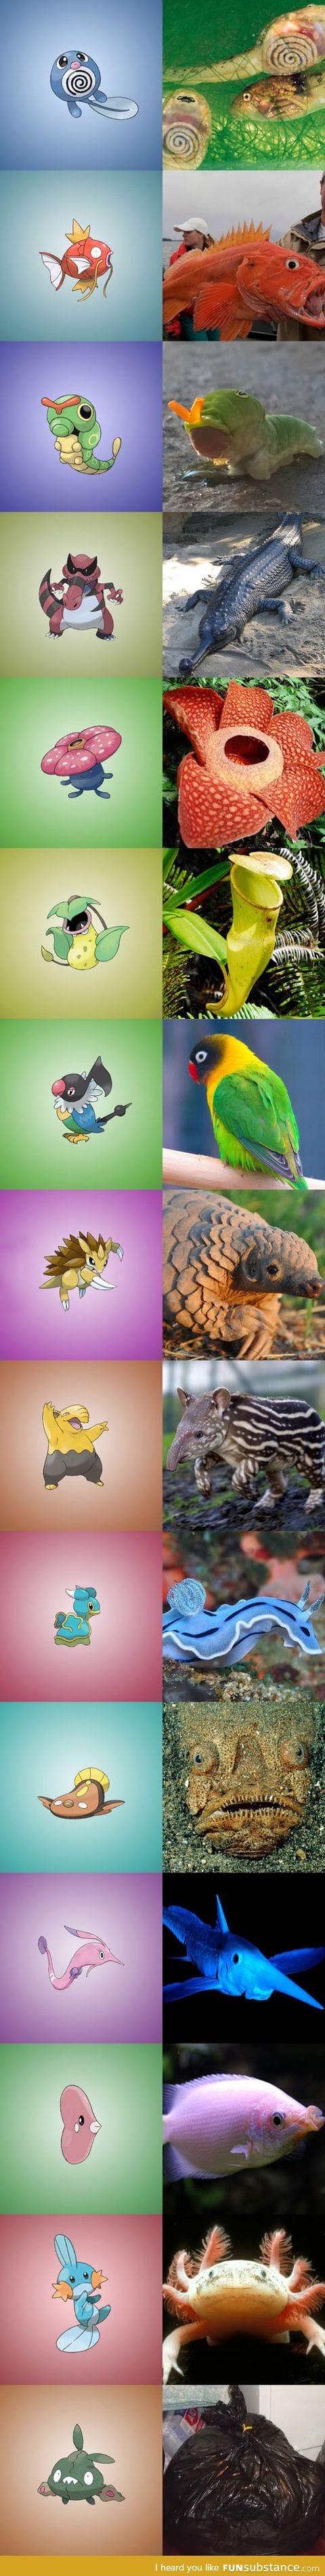 Real things that inspired pokemons